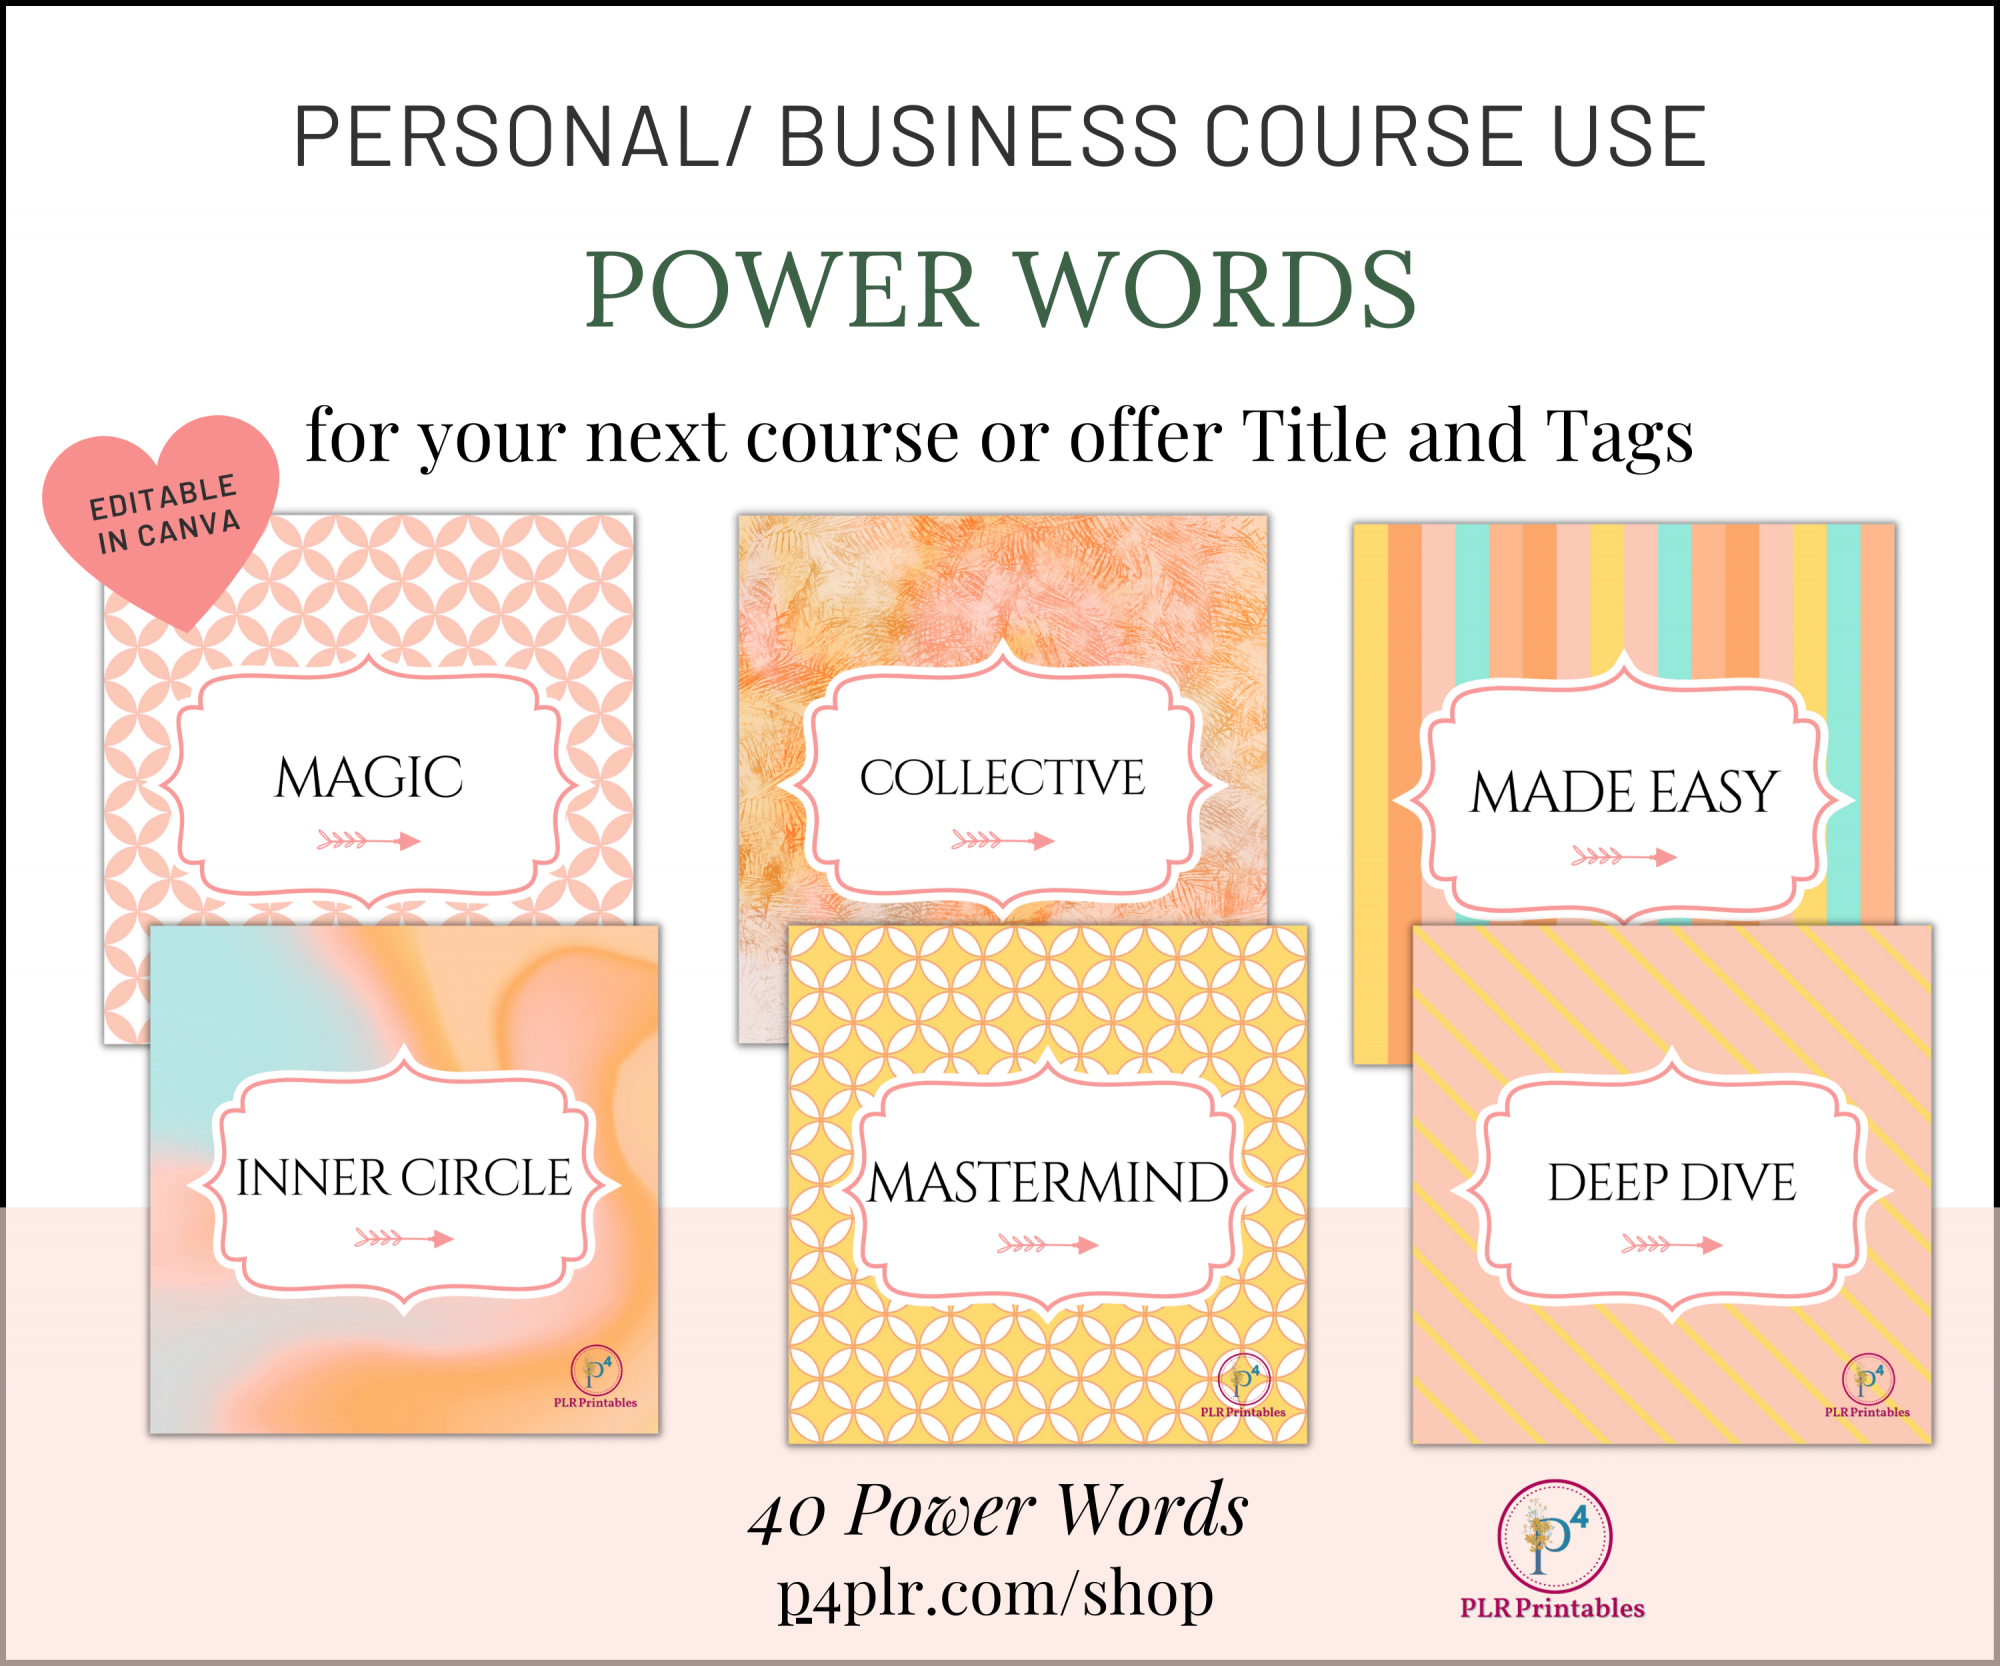 NEW! Power Words List For Sales